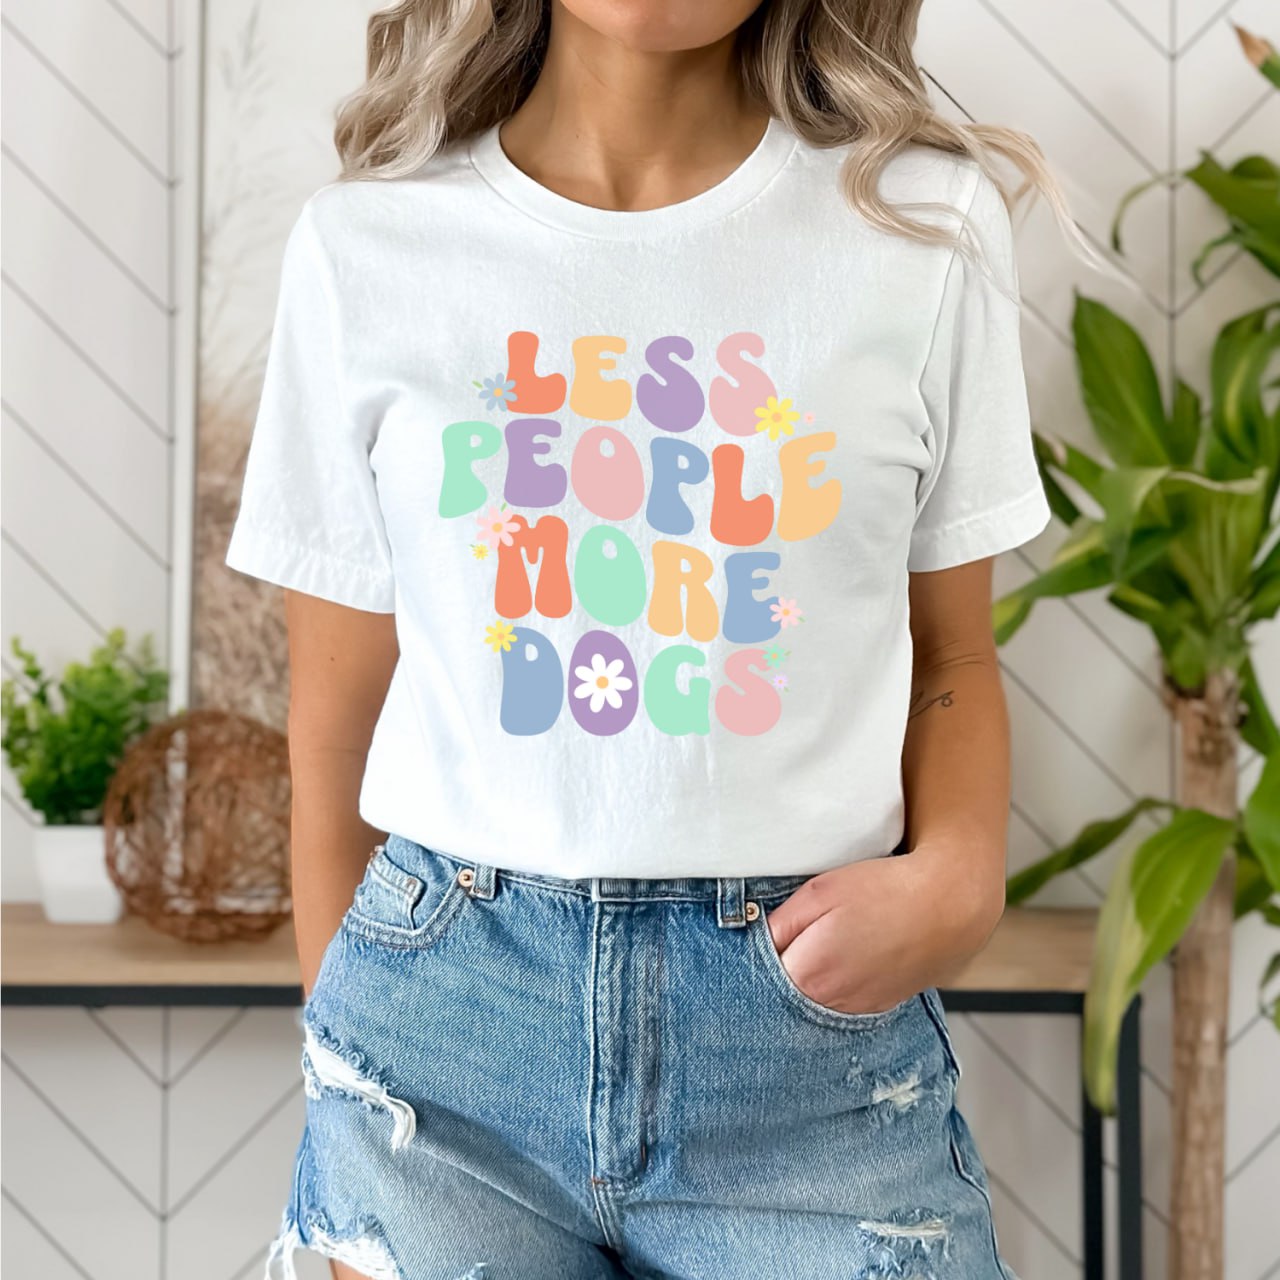 Less Dogs More People - DTF Full Transfer